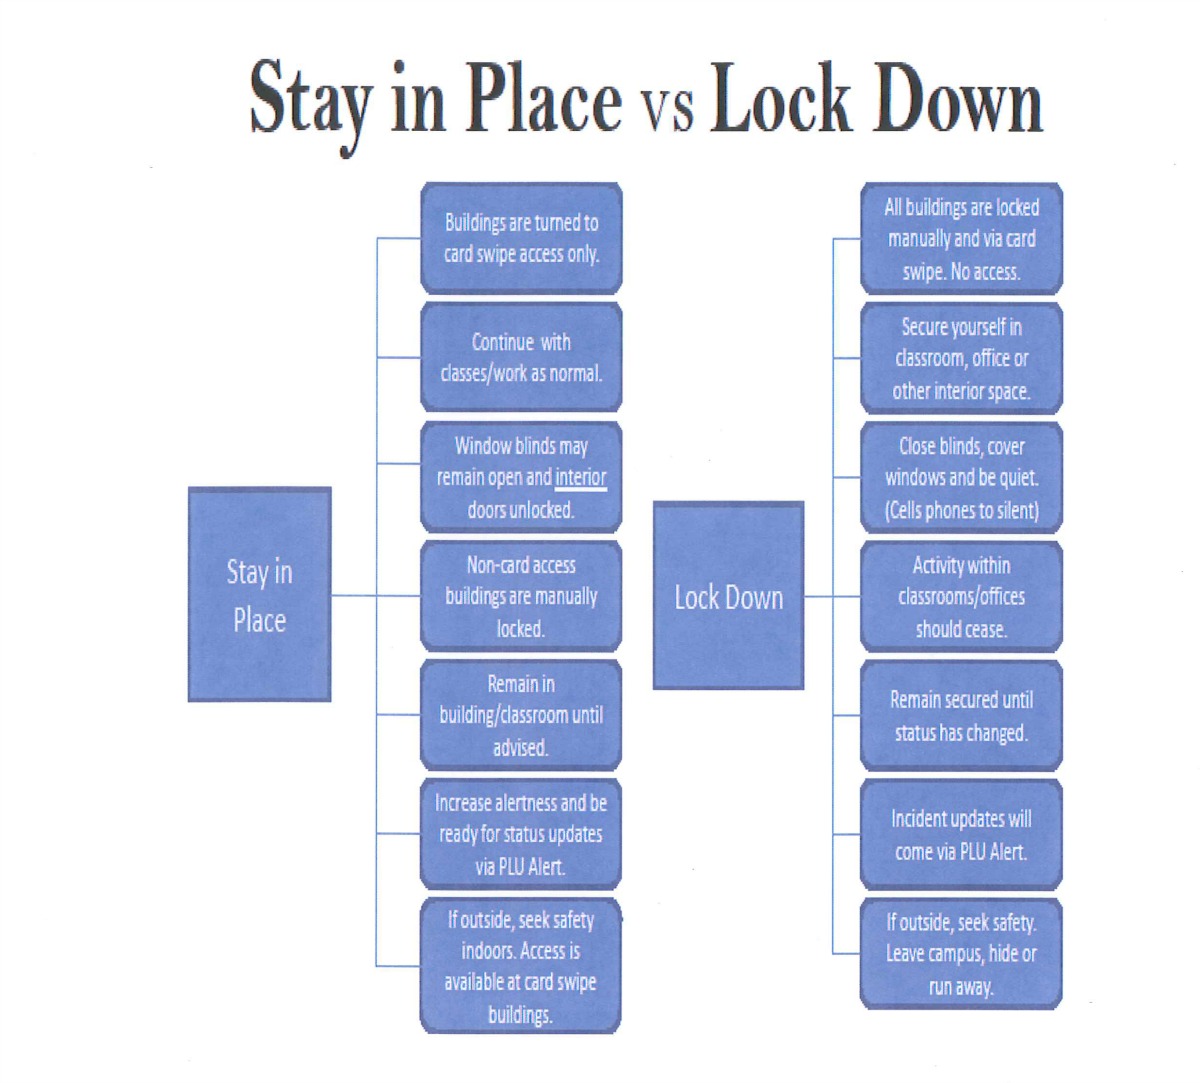 Stay in Place vs. Lock Down chart - Stay in place directions: buildings are turned to card swipe access only, continue with classes/work as normal, window blinds may remain open and interior doors unlocked, non-card access buildings are manually locked, remain in building/classroom until advised, increase alertness and be ready for status updates via PLU alert, if outside, seek safety indoors, access is available at card swipe buildings. Lock Down directions: all buildings are locked manually and via card swipe No access, secure yourself in classroom office or other interior space, close blinds cover windows and be quiet (cell phones to silent), activity within classrooms/offices should cease, remain secured until status has changed, incident updates will come via PLU alert, if outside seek safety leave campus, hide or run away.